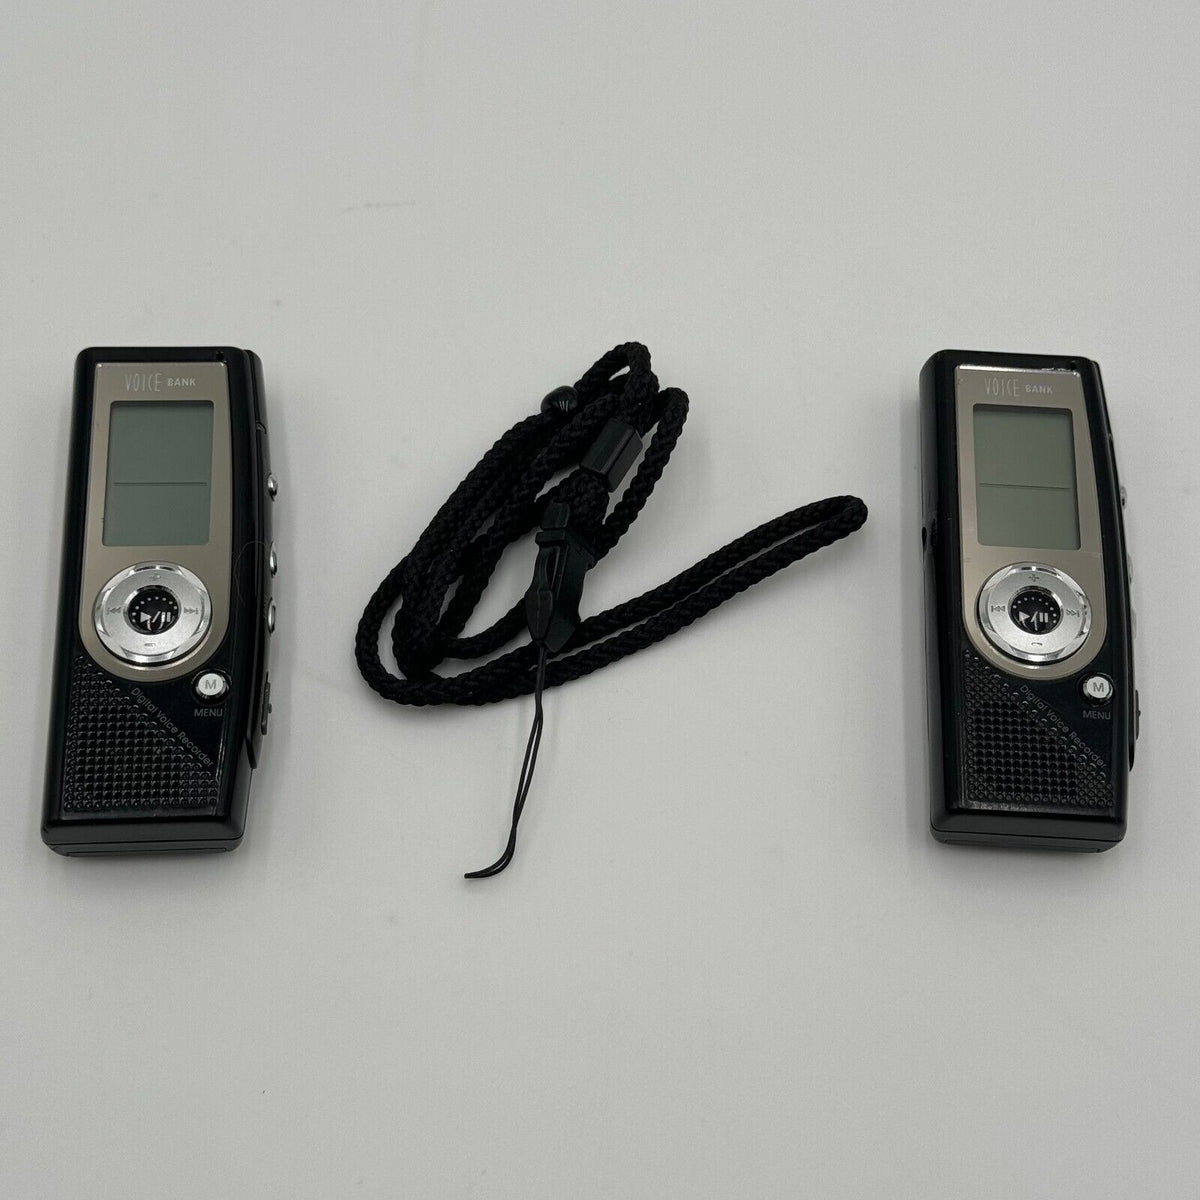 Voice Bank Pair of 2 Digital Voice Recorders Diasonic DDR-5000 with Lanyard